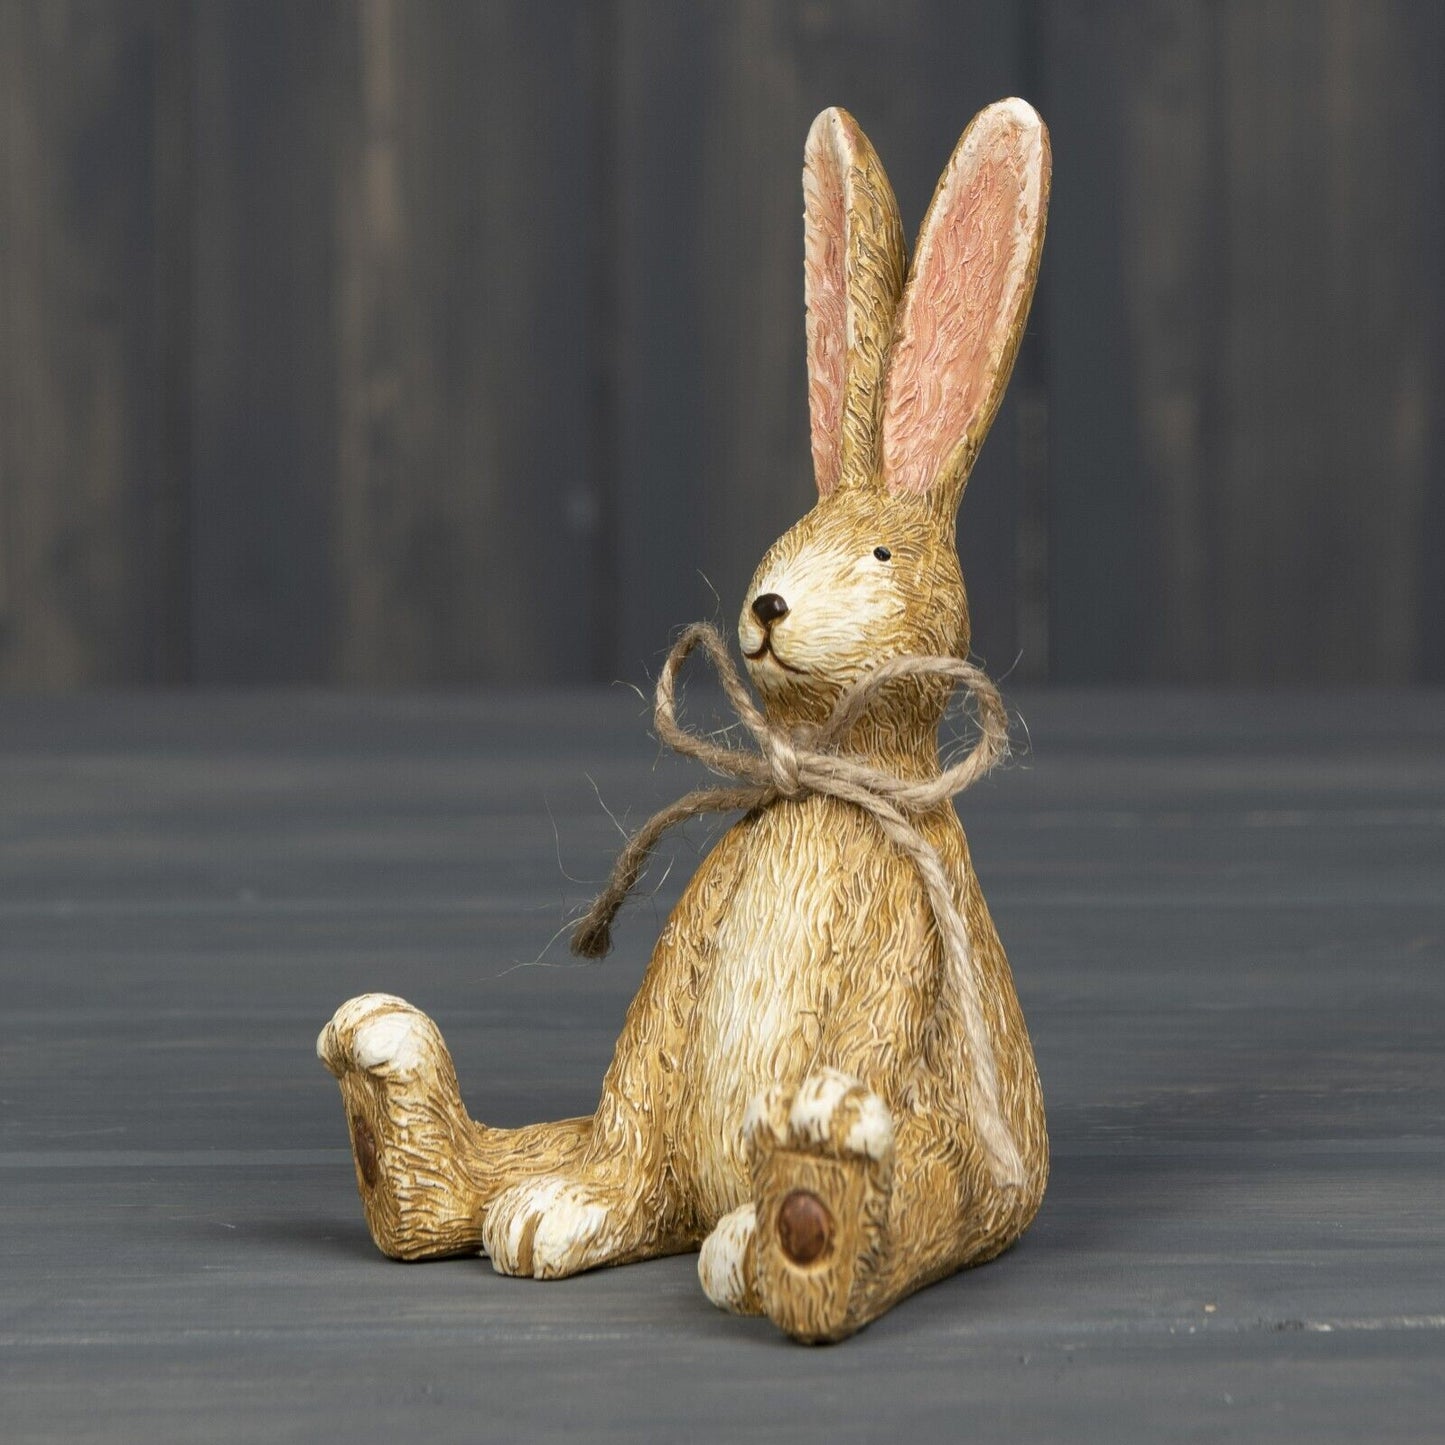 10cm Cute Siting Rabbit Hare Easter Decor Figurine Wood Effect Home Decoration